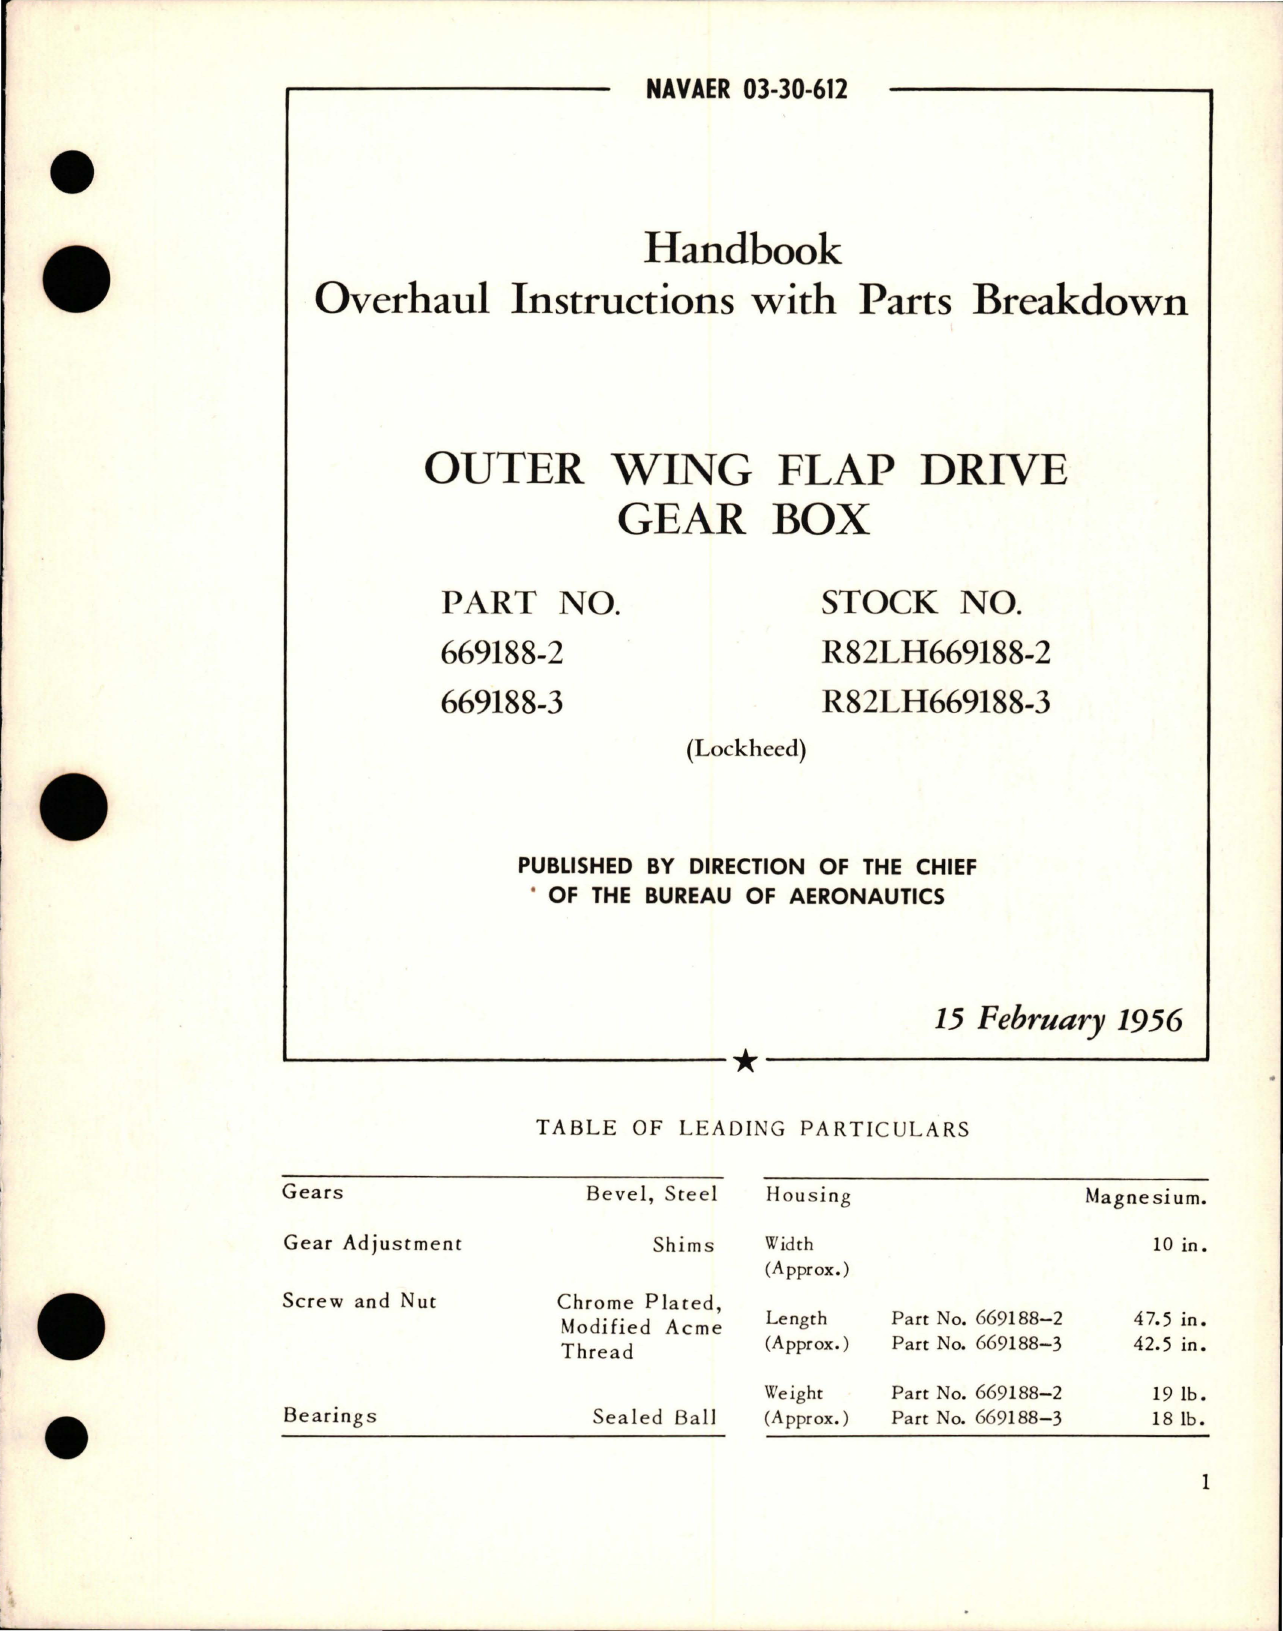 Sample page 1 from AirCorps Library document: Overhaul Instructions with Parts Breakdown for Outter Wing Flap Drive Gear Box - Parts 669188-2 and 669188-3